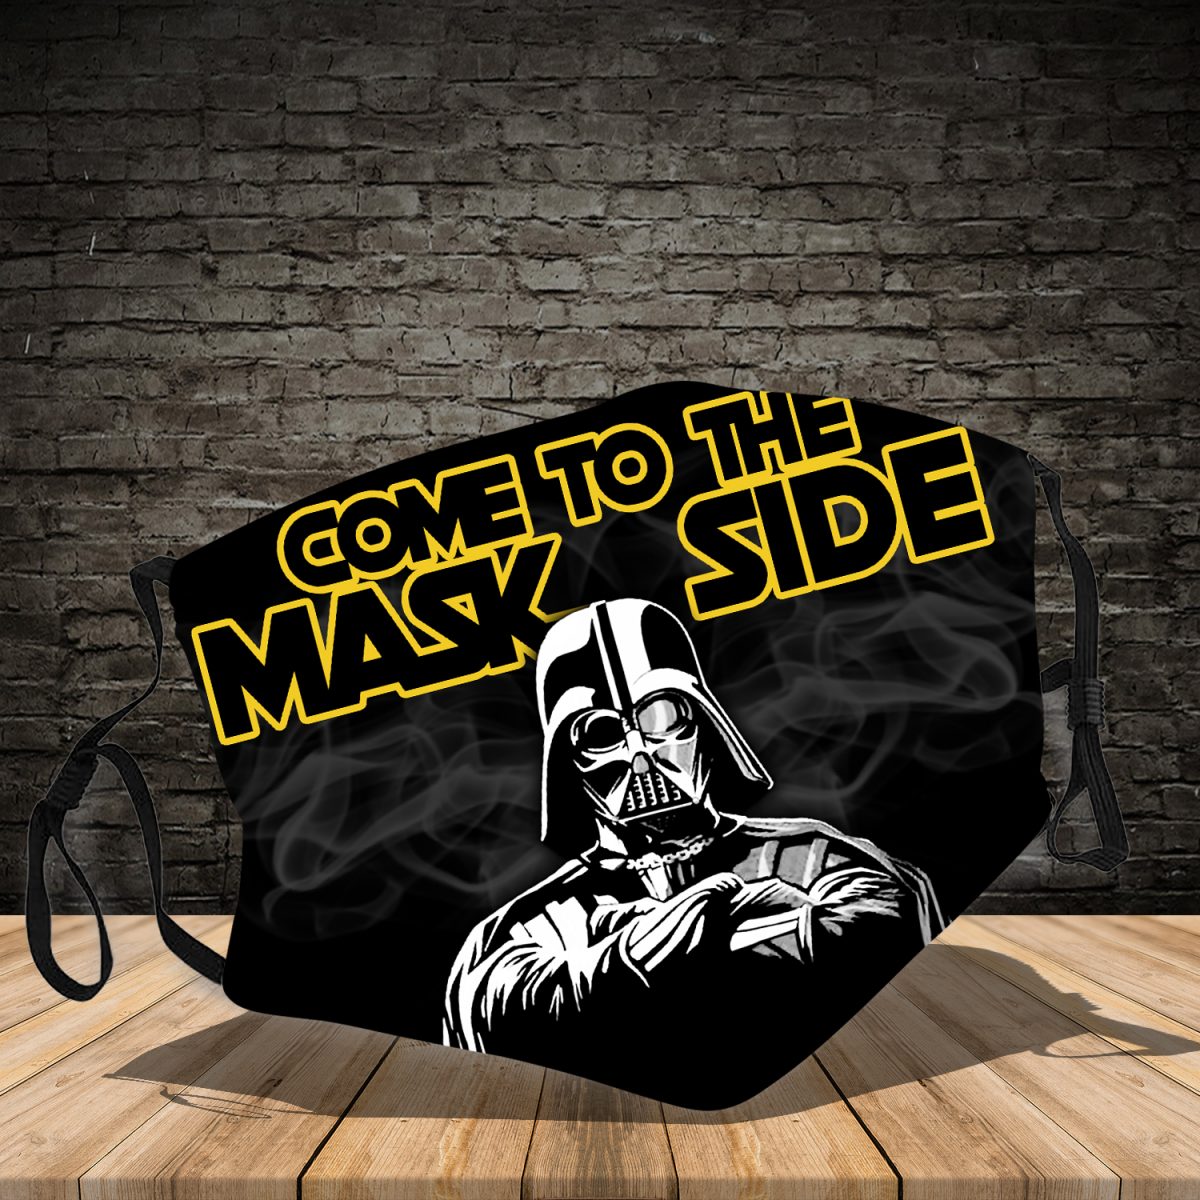 Come to the mask side Star wars face mask